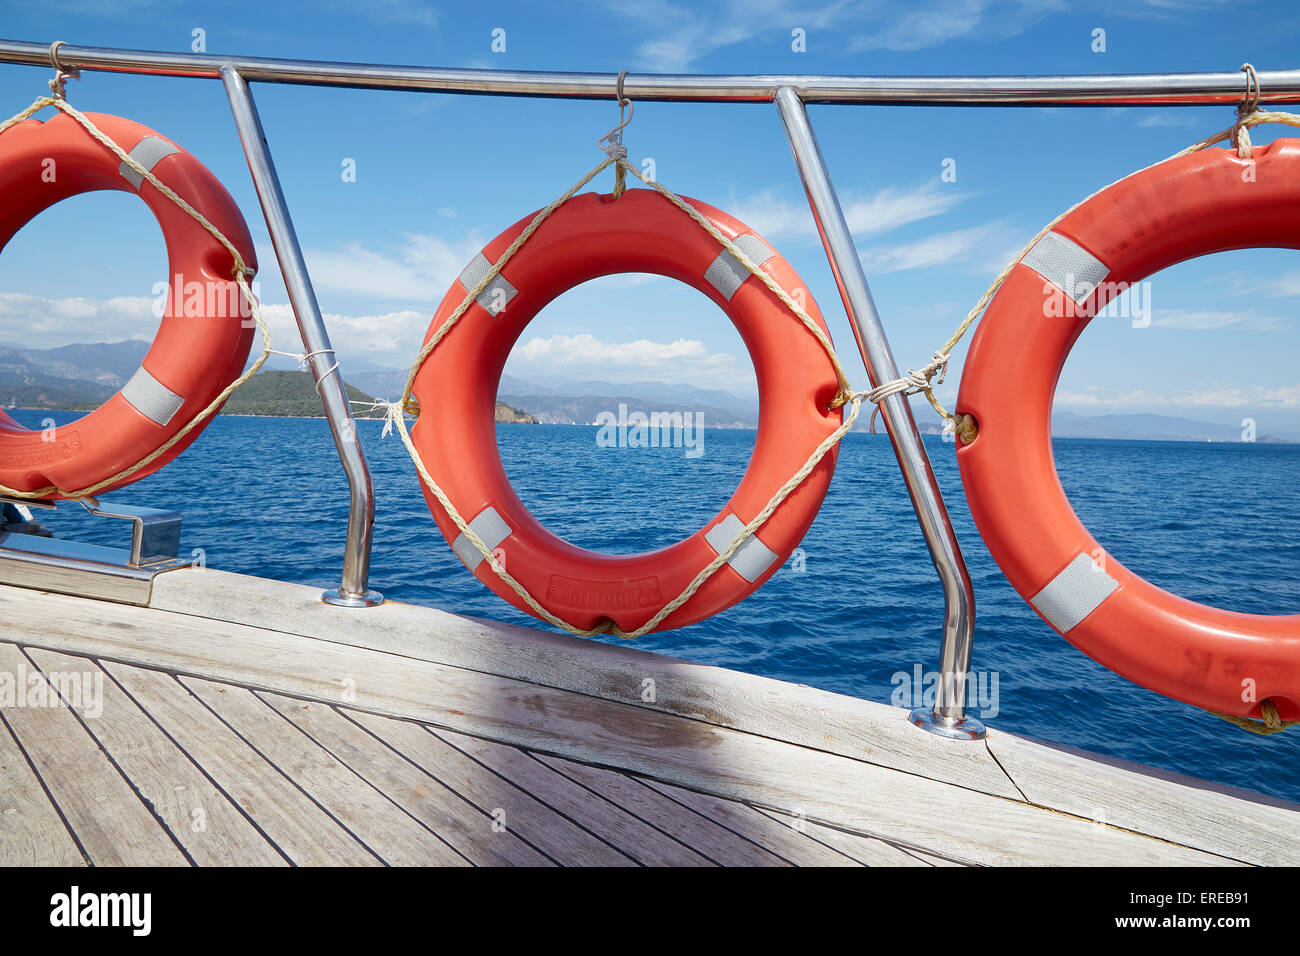 A lifebuoy safety ring on board a boat sailing out of Fethiye, Turkey. Stock Photo